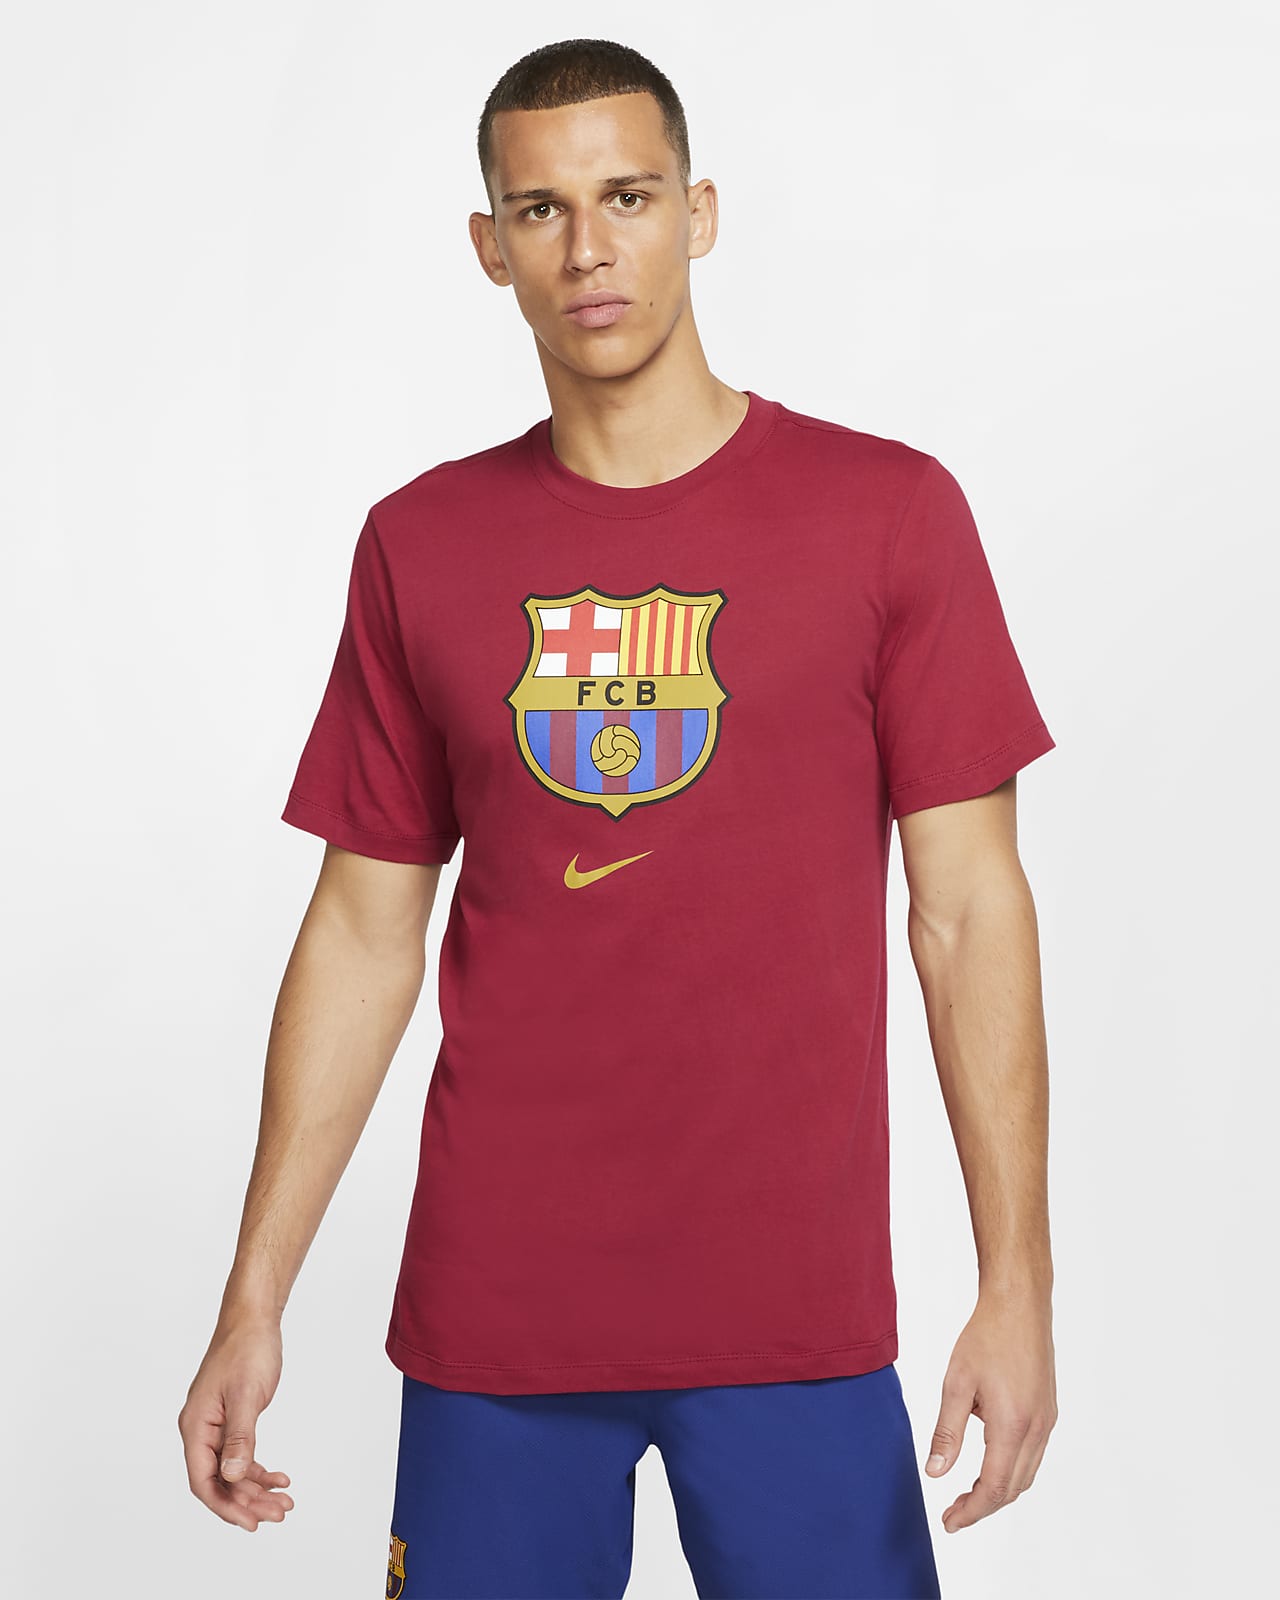 noble red nike shirt